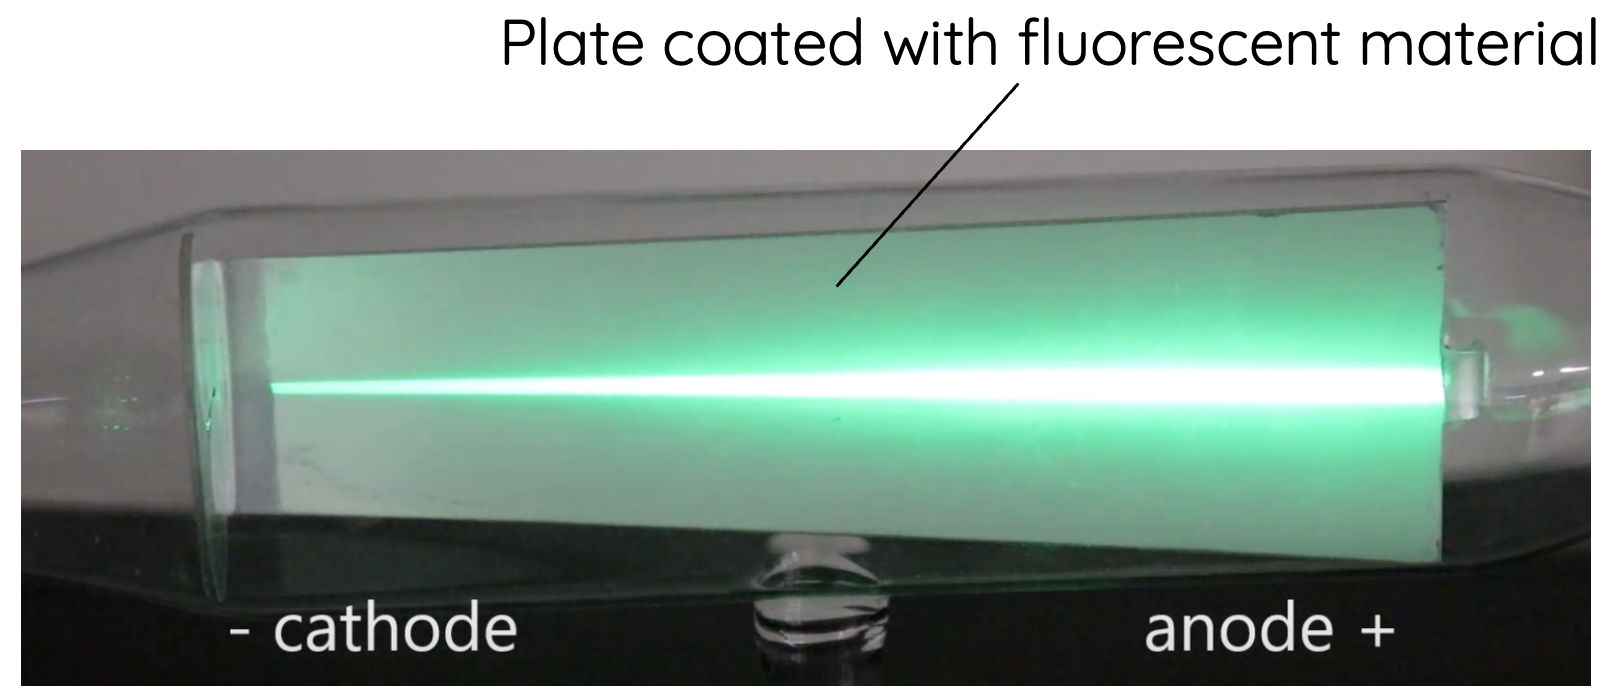 cathode ray tube containing a plate coated with fluorescent material